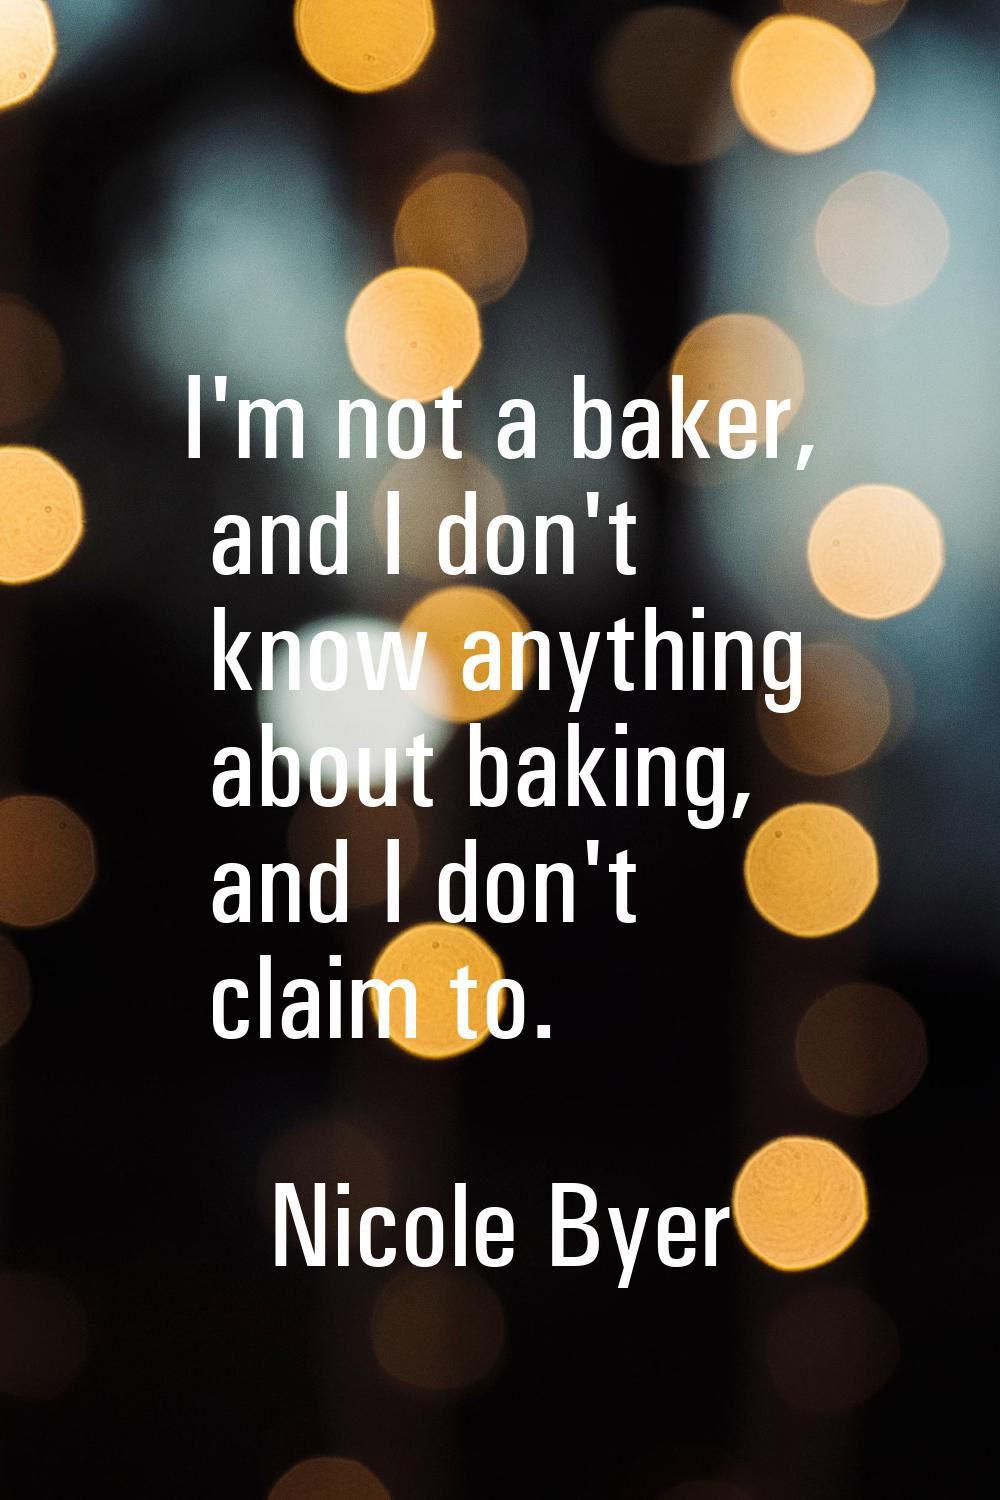 I'm not a baker, and I don't know anything about baking, and I don't claim to.